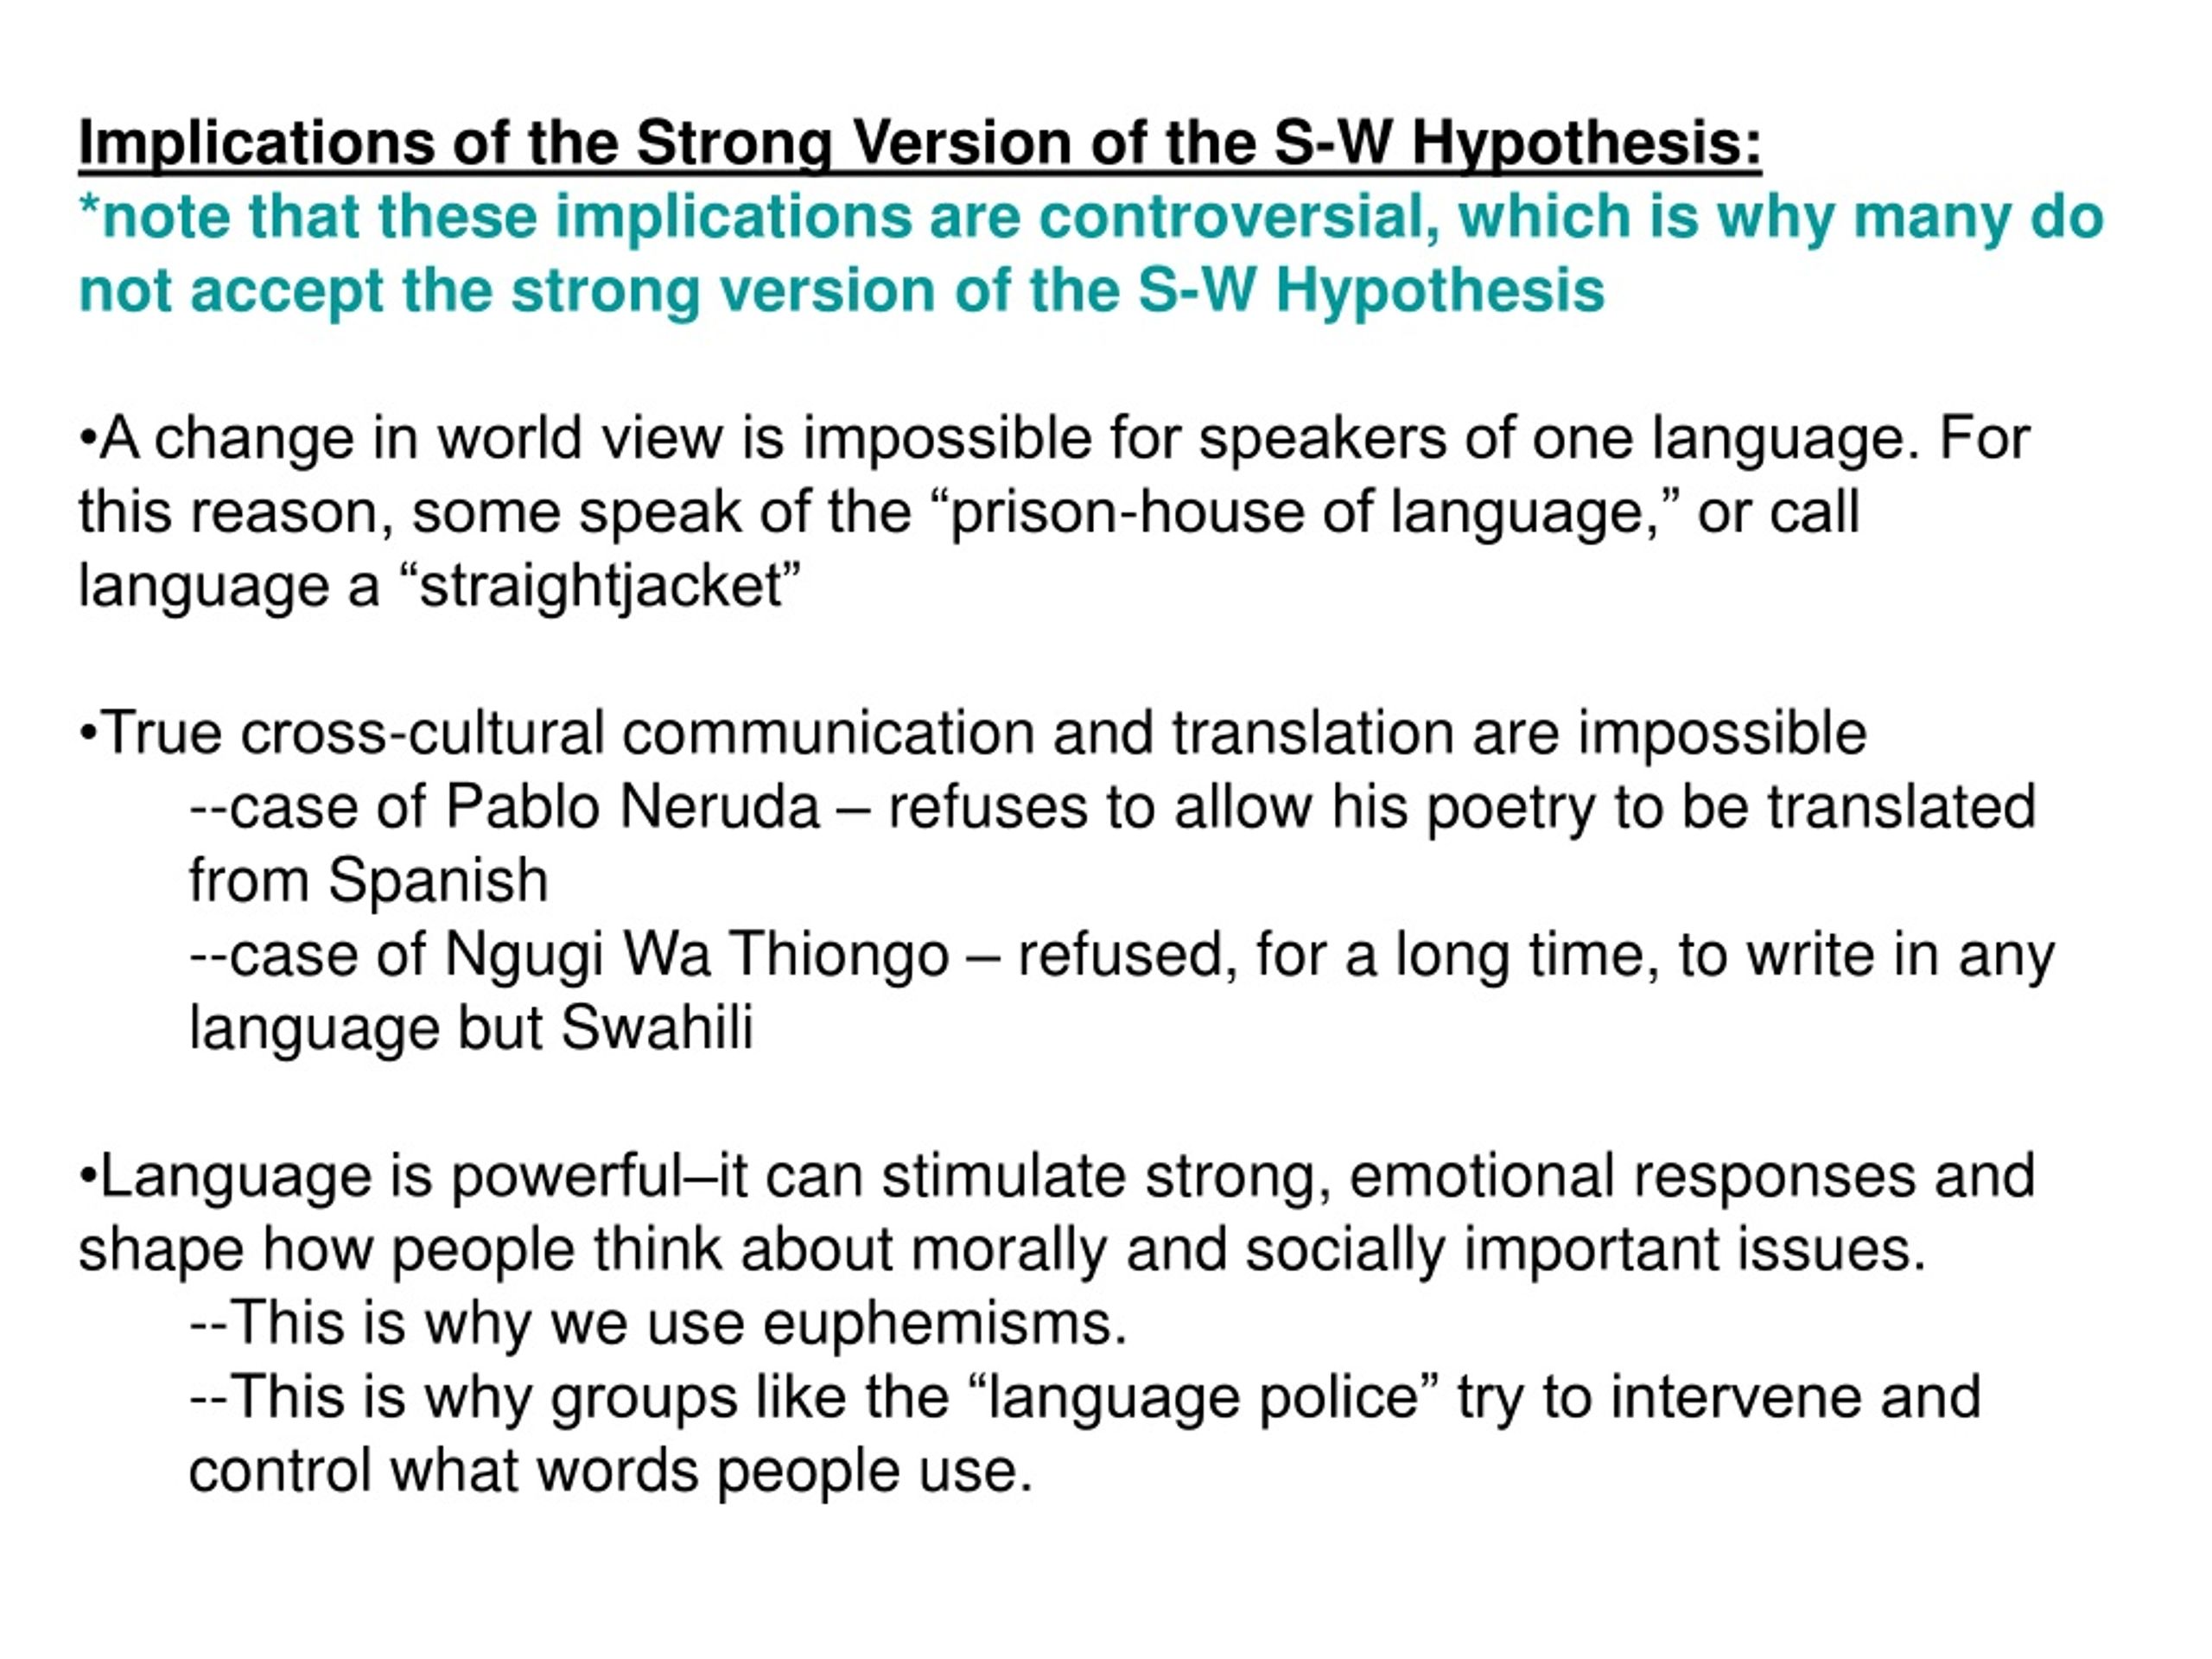 sapir whorf hypothesis weak and strong version